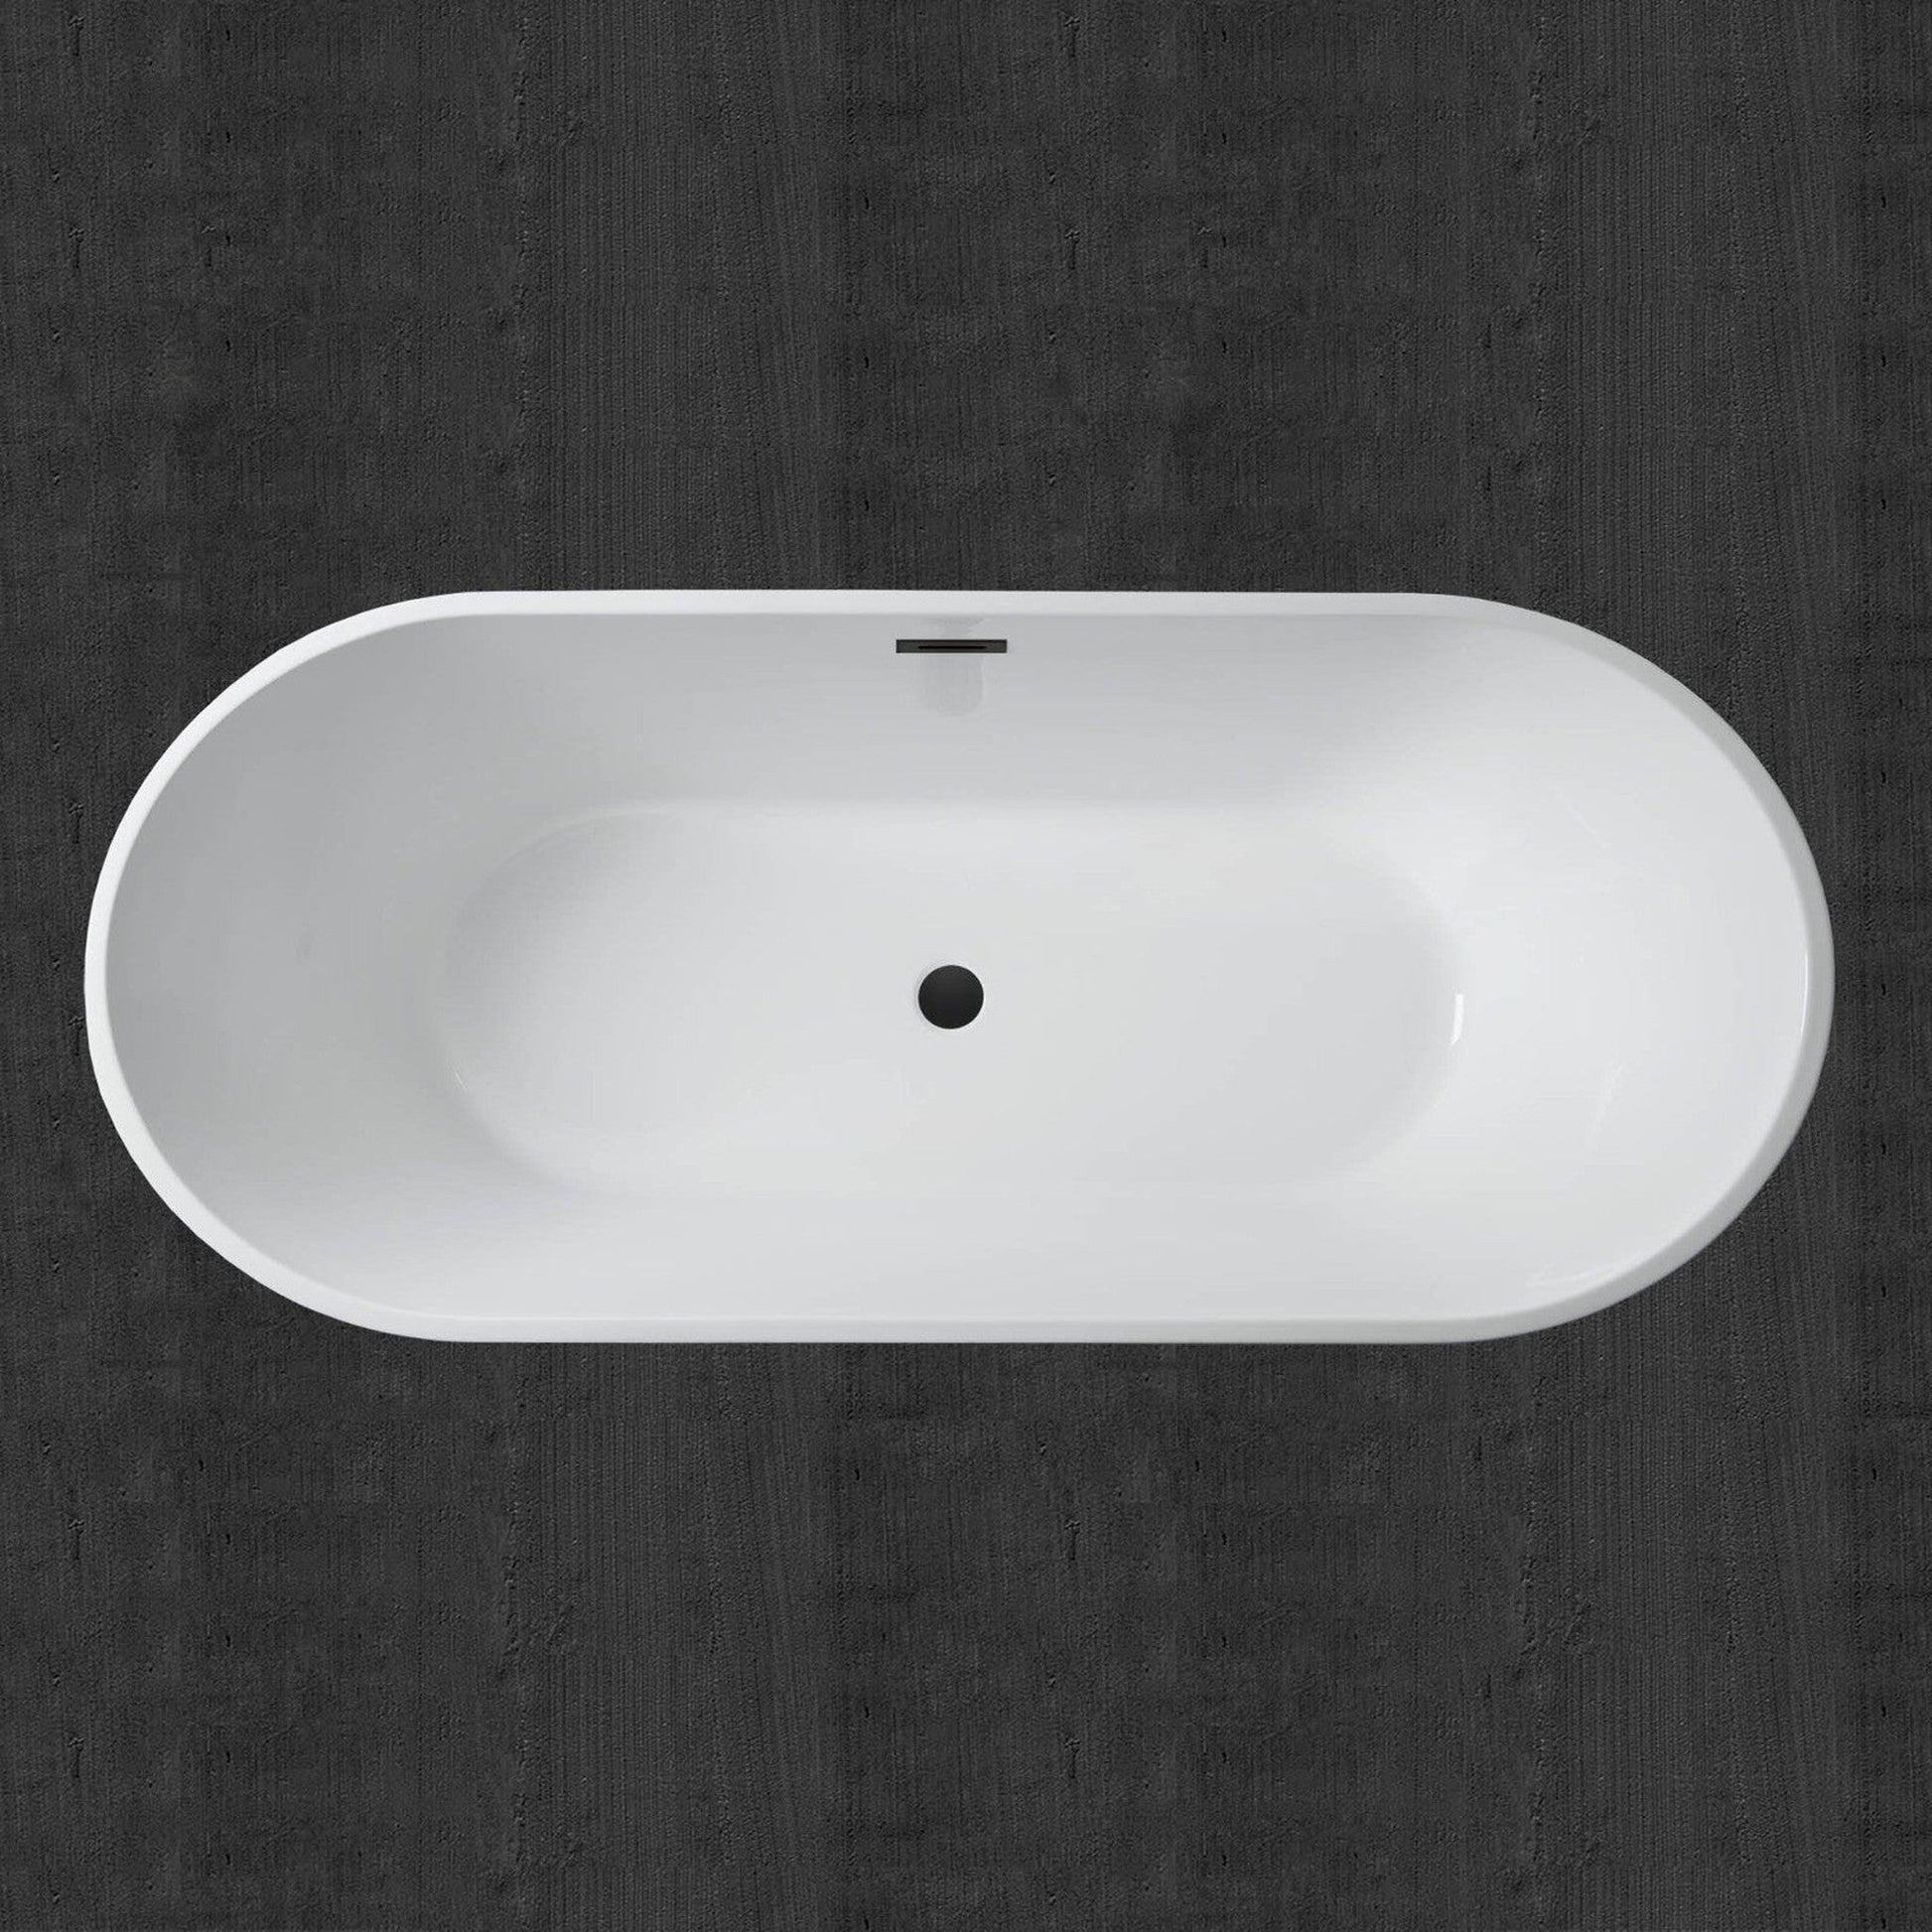 WoodBridge 71" White Acrylic Freestanding Contemporary Soaking Bathtub With Matte Black Drain, Overflow, F0072MBVT Tub Filler and Caddy Tray